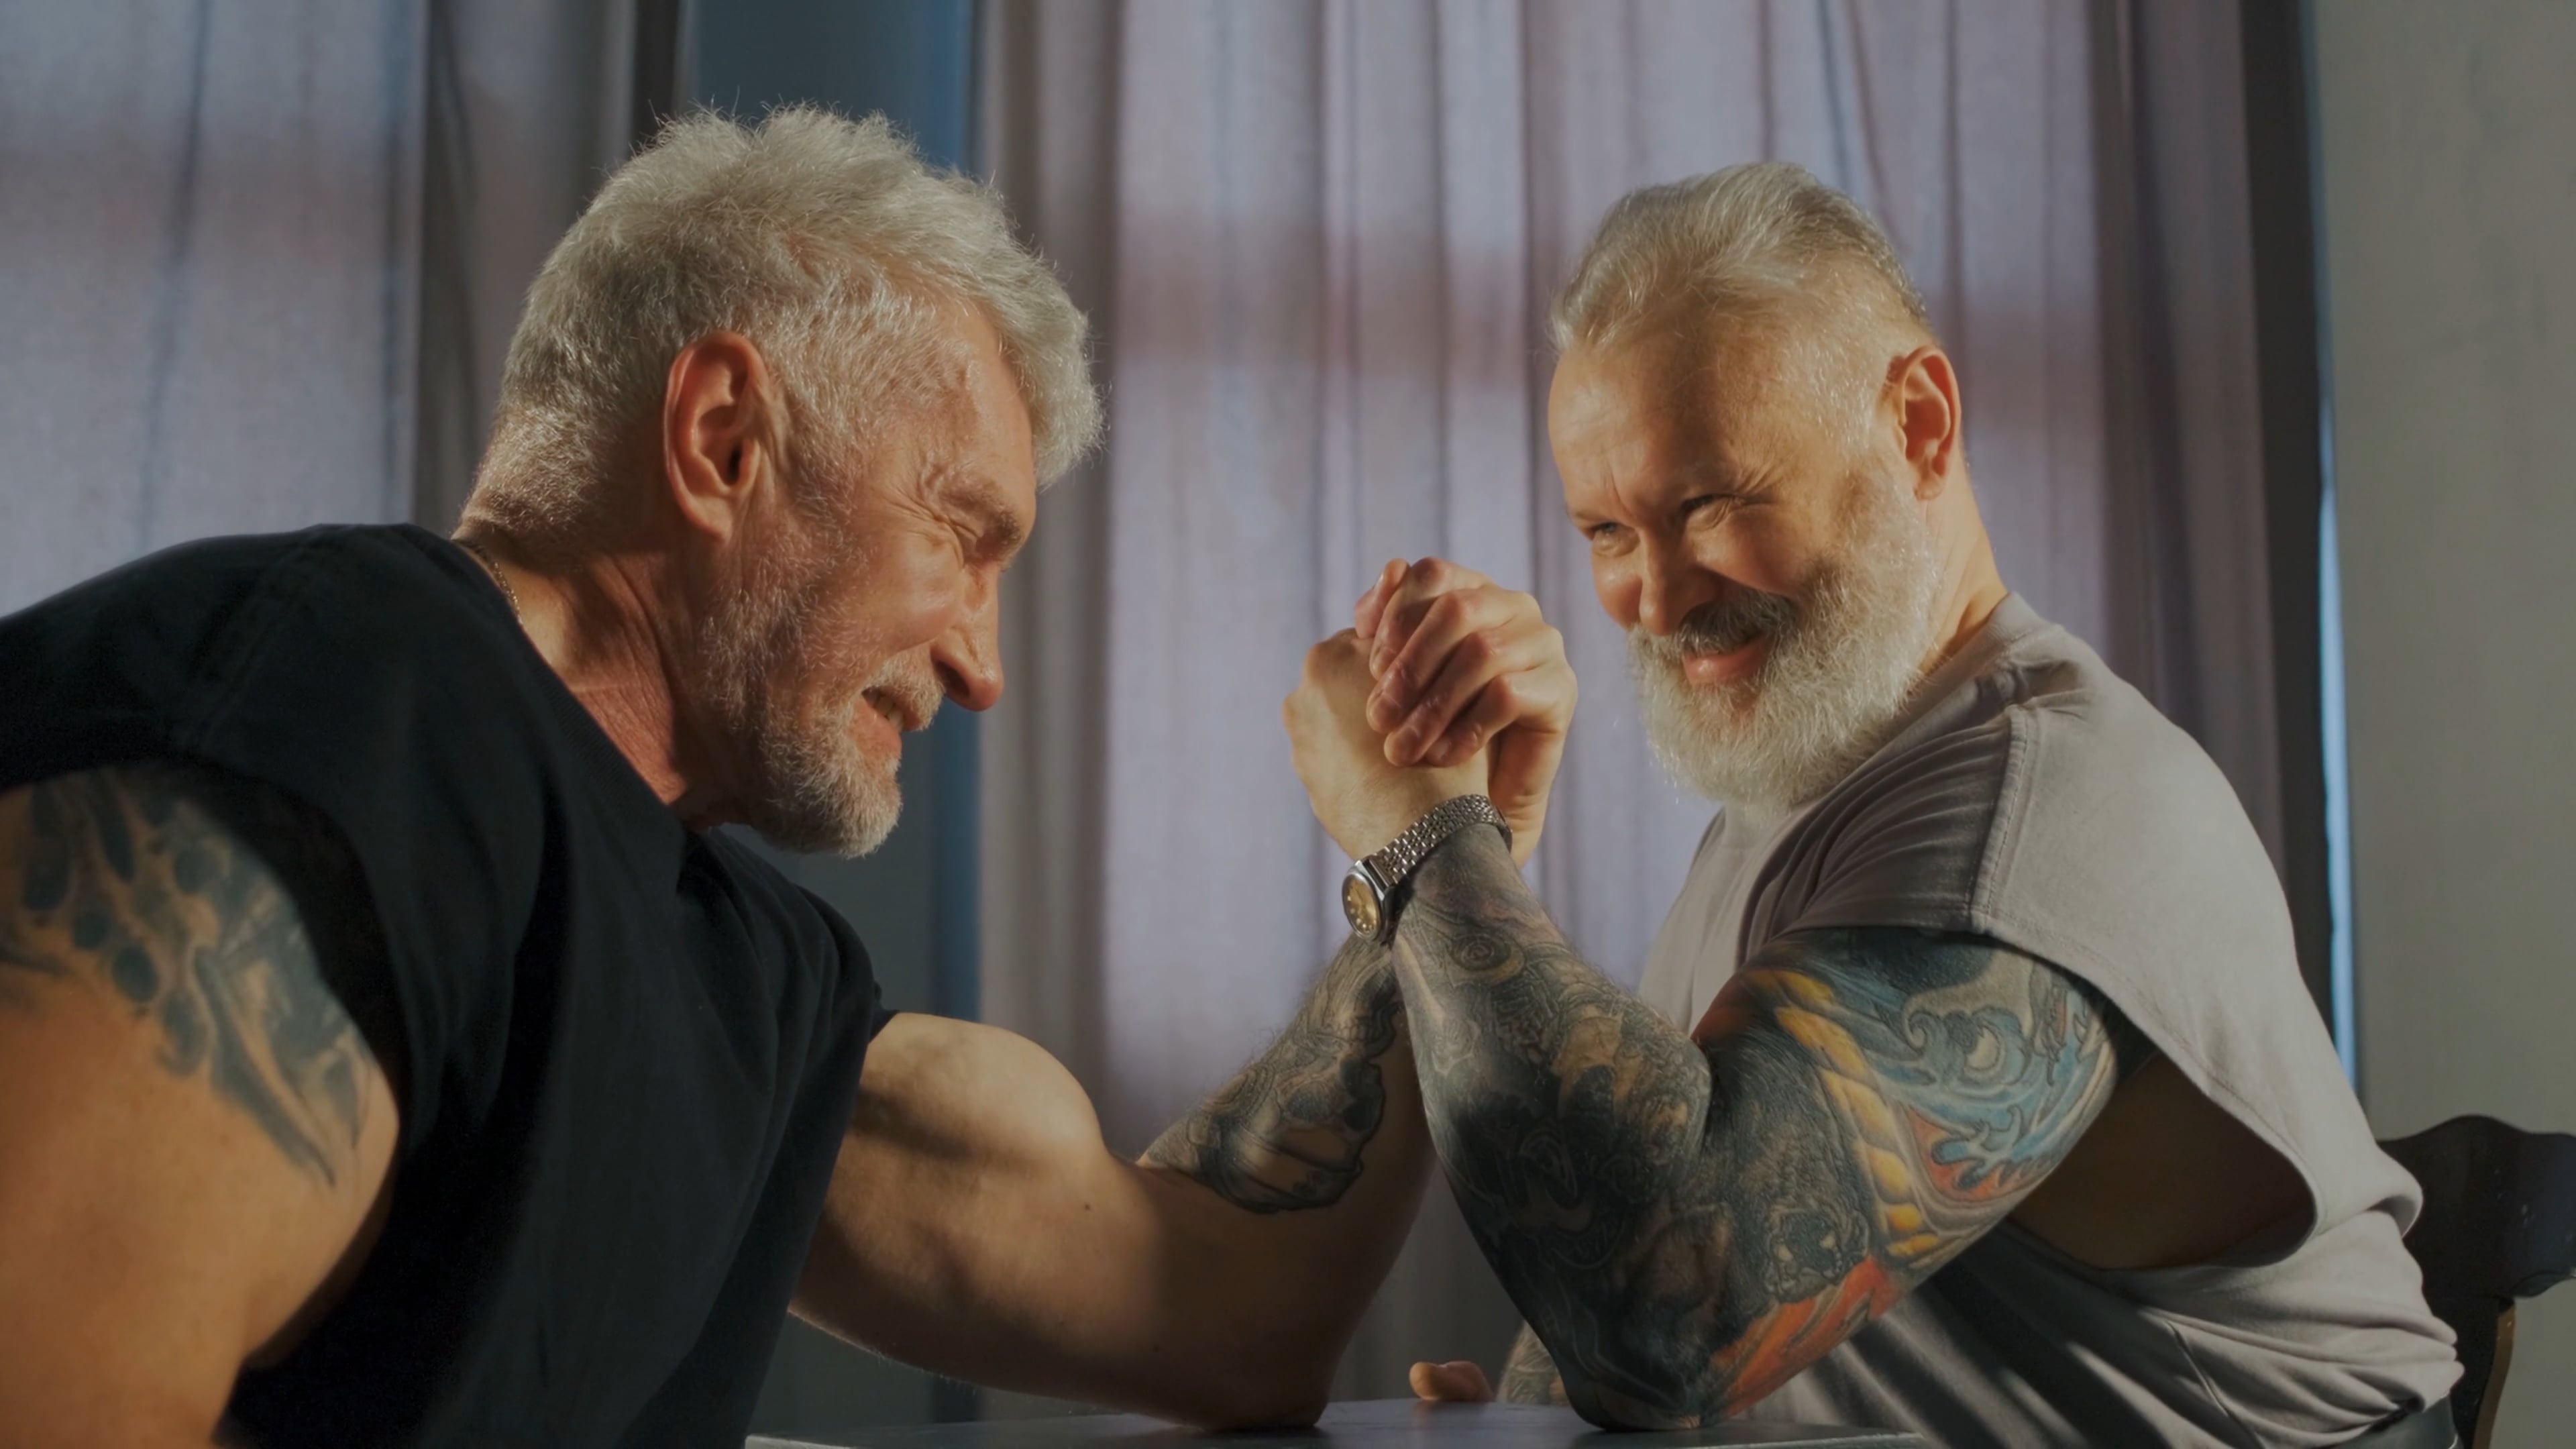 Arm Wrestling: Sport with bent elbows placed on a table, Two tattooed men wrestle on their hands, Strong arms. 3840x2160 4K Wallpaper.